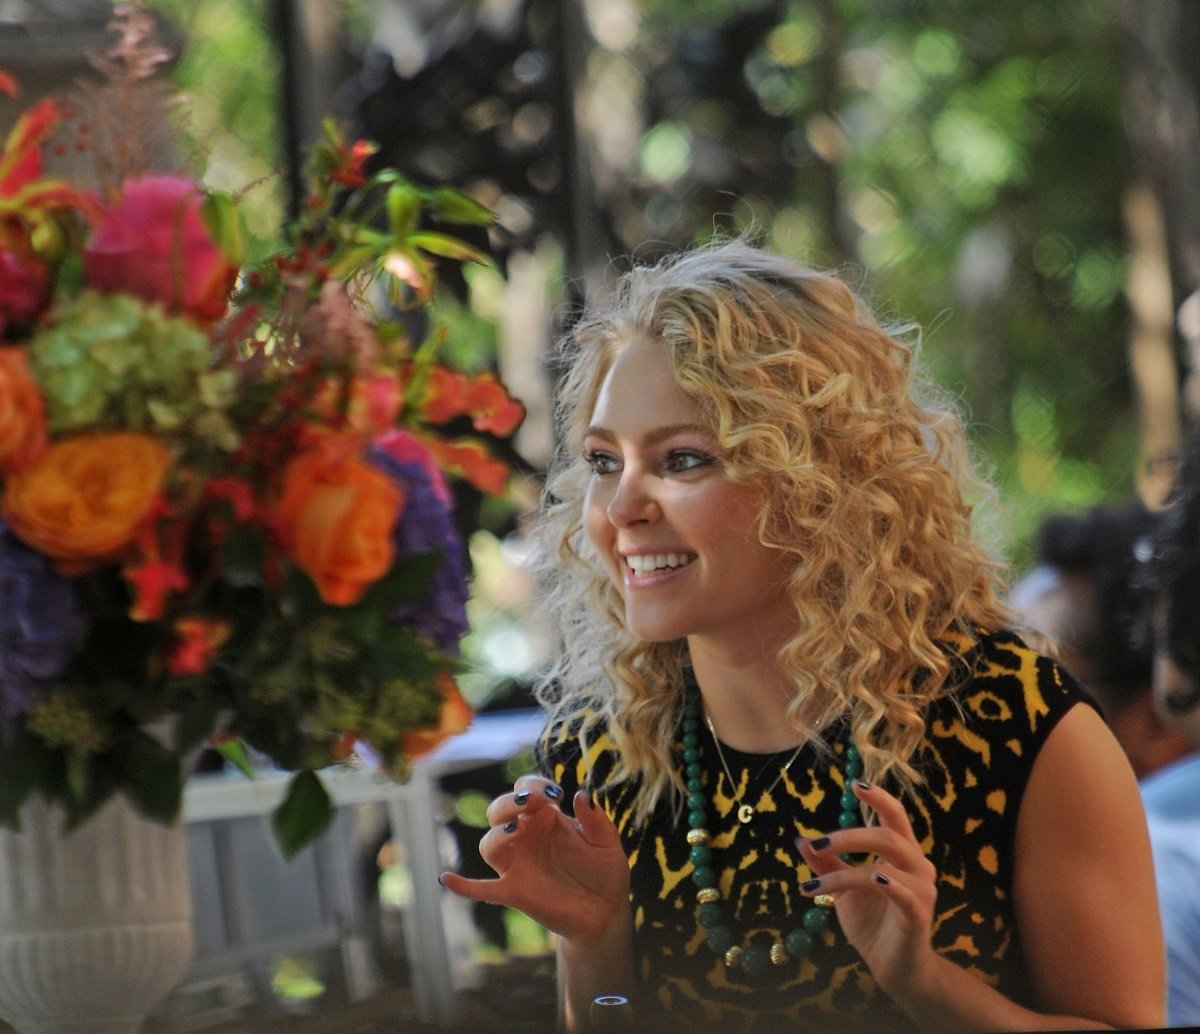 AnnaSophia Robb as Carrie Bradshaw on the set of "The Carrie Diaries." The series never explained where Carrie Bradshaw went to college, but another prequel did.